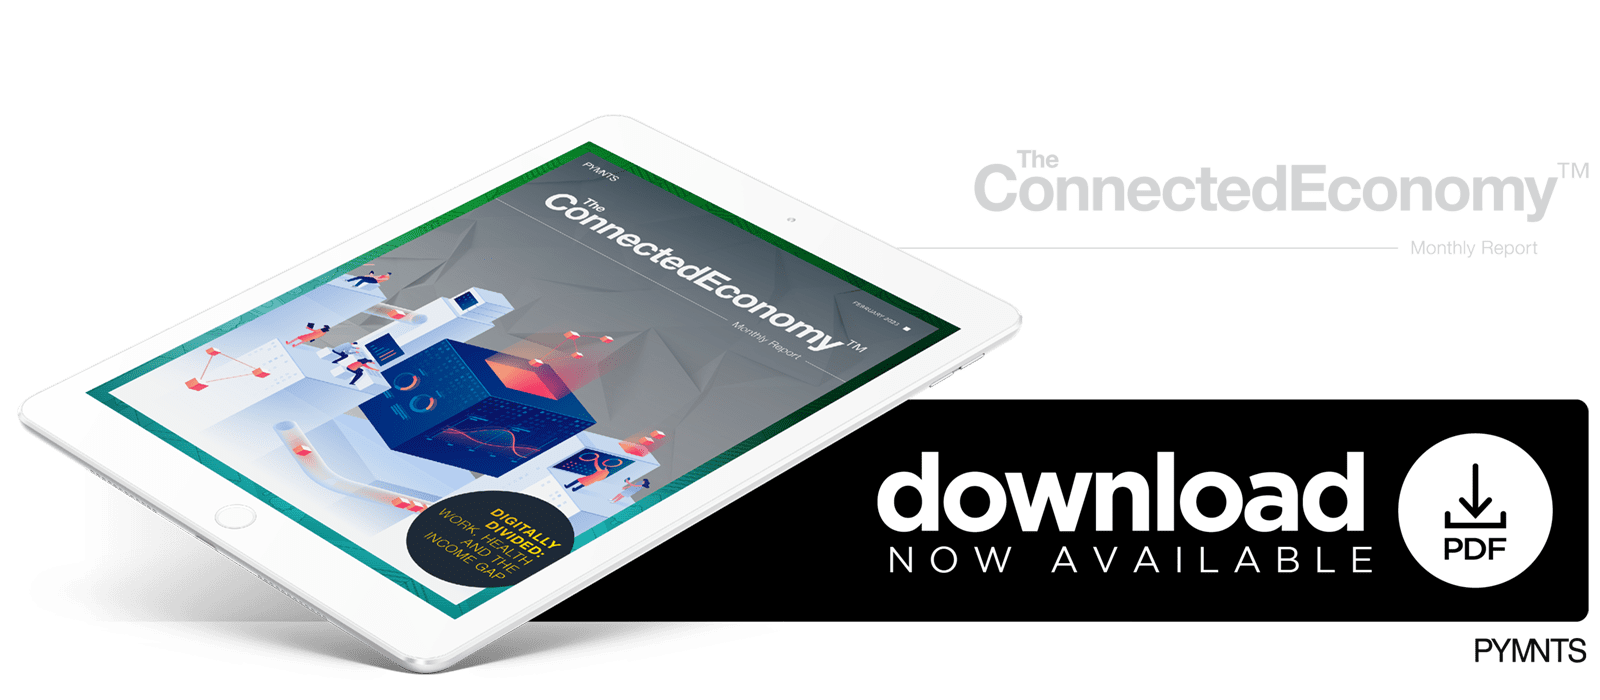 PYMNTS - The ConnectedEconomy™ Monthly Report: : Digitally Divided — Work, Health and the Income Gap - February 2023 - Explore how the digital engagement and behaviors of the United States' highest-and lowest-paid consumers continues to diverge and what that means for the future of the ConnectedEconomy™